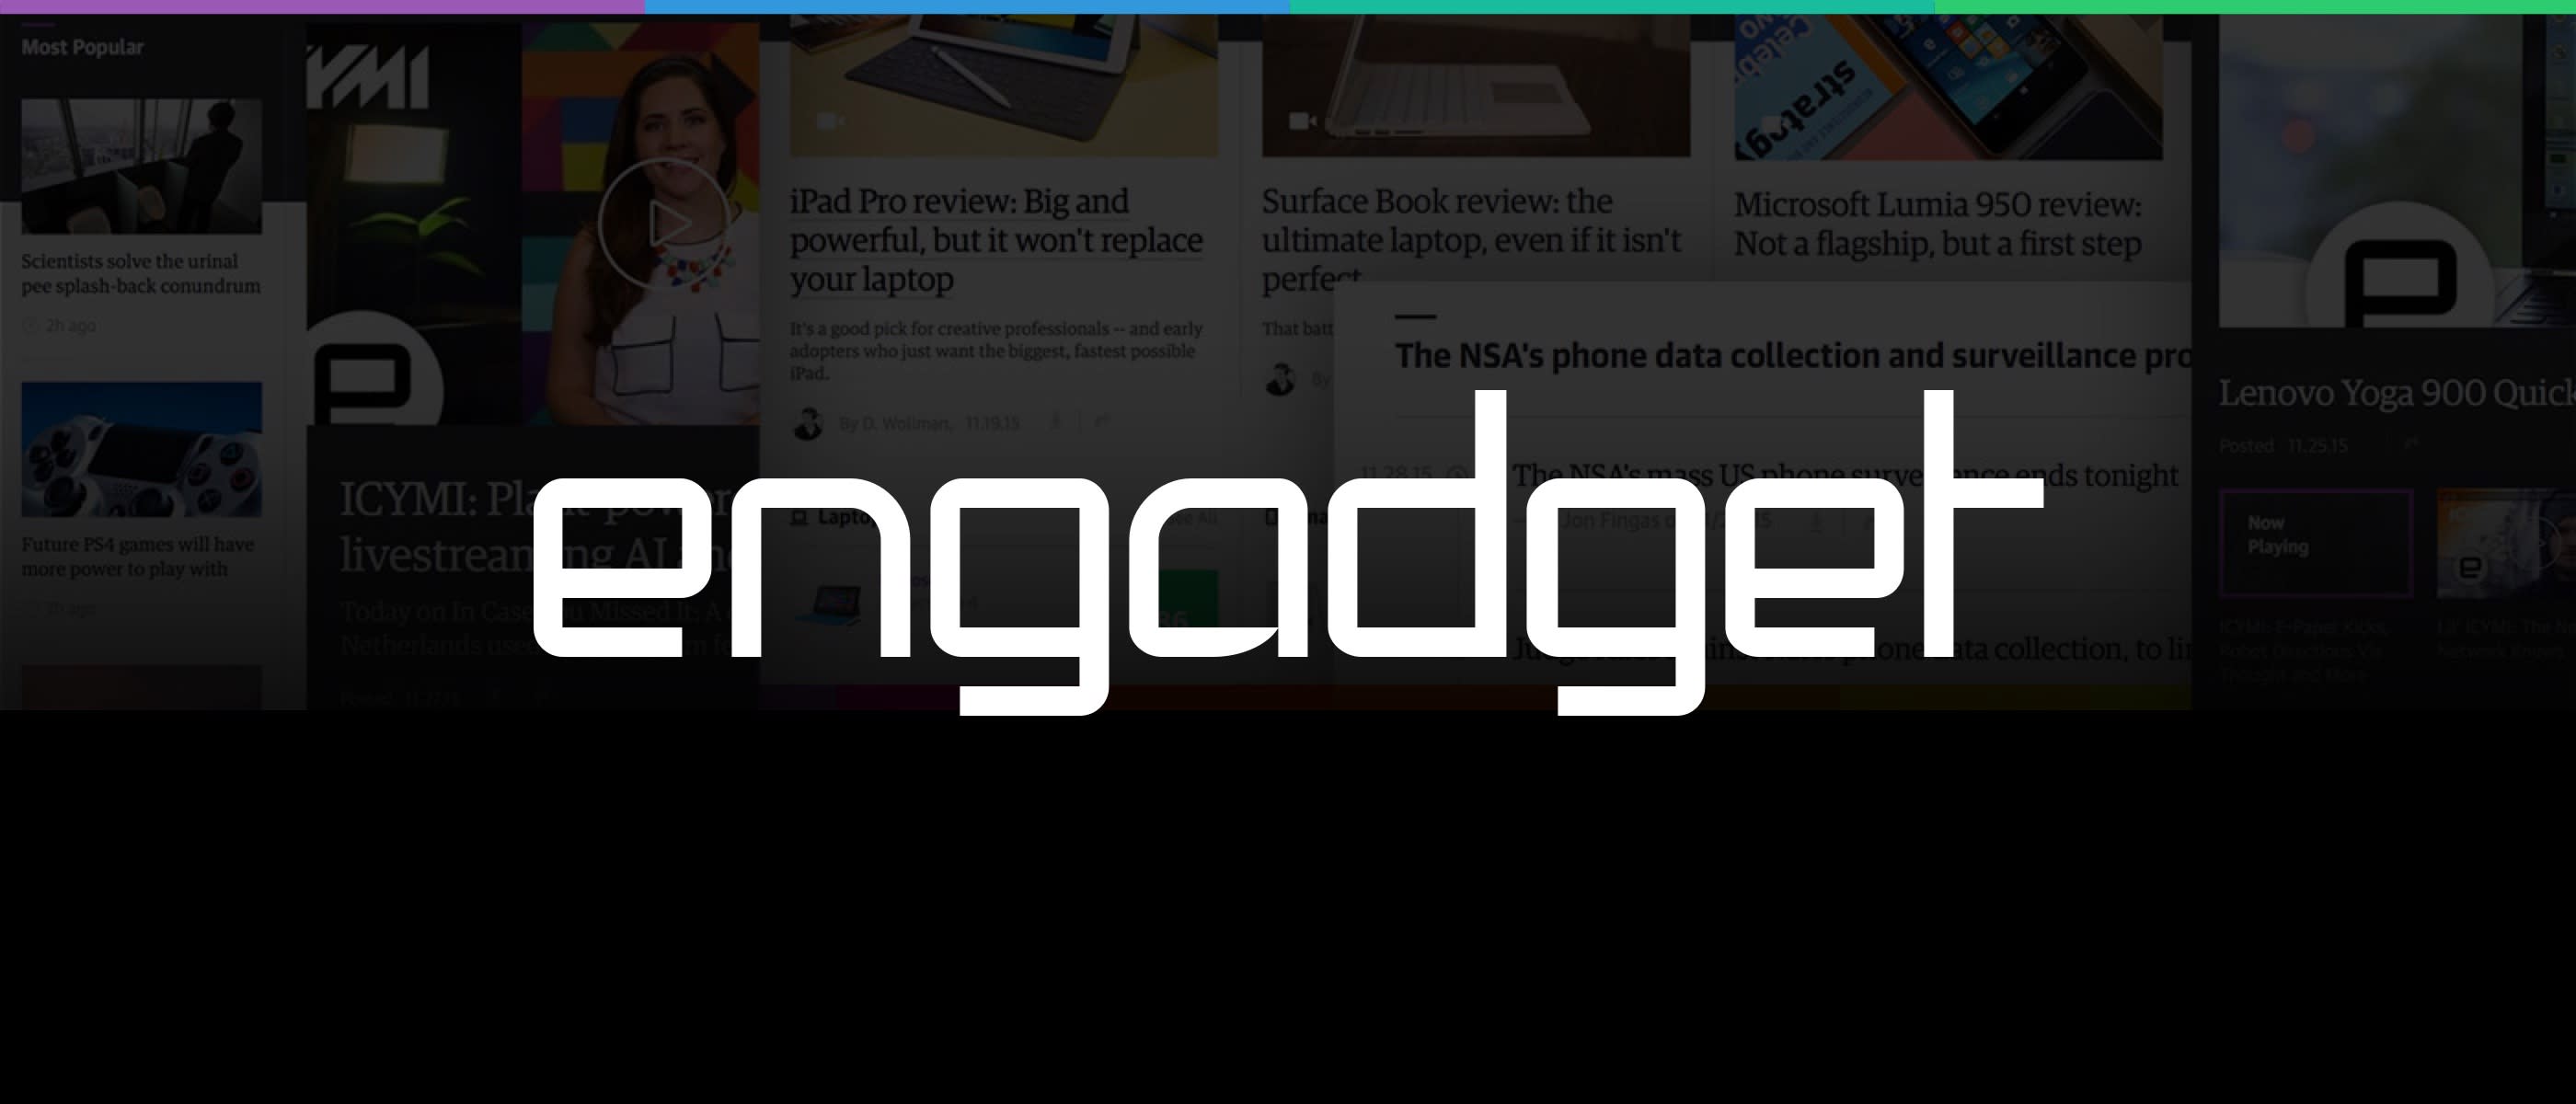 The next phase of Engadget's evolution